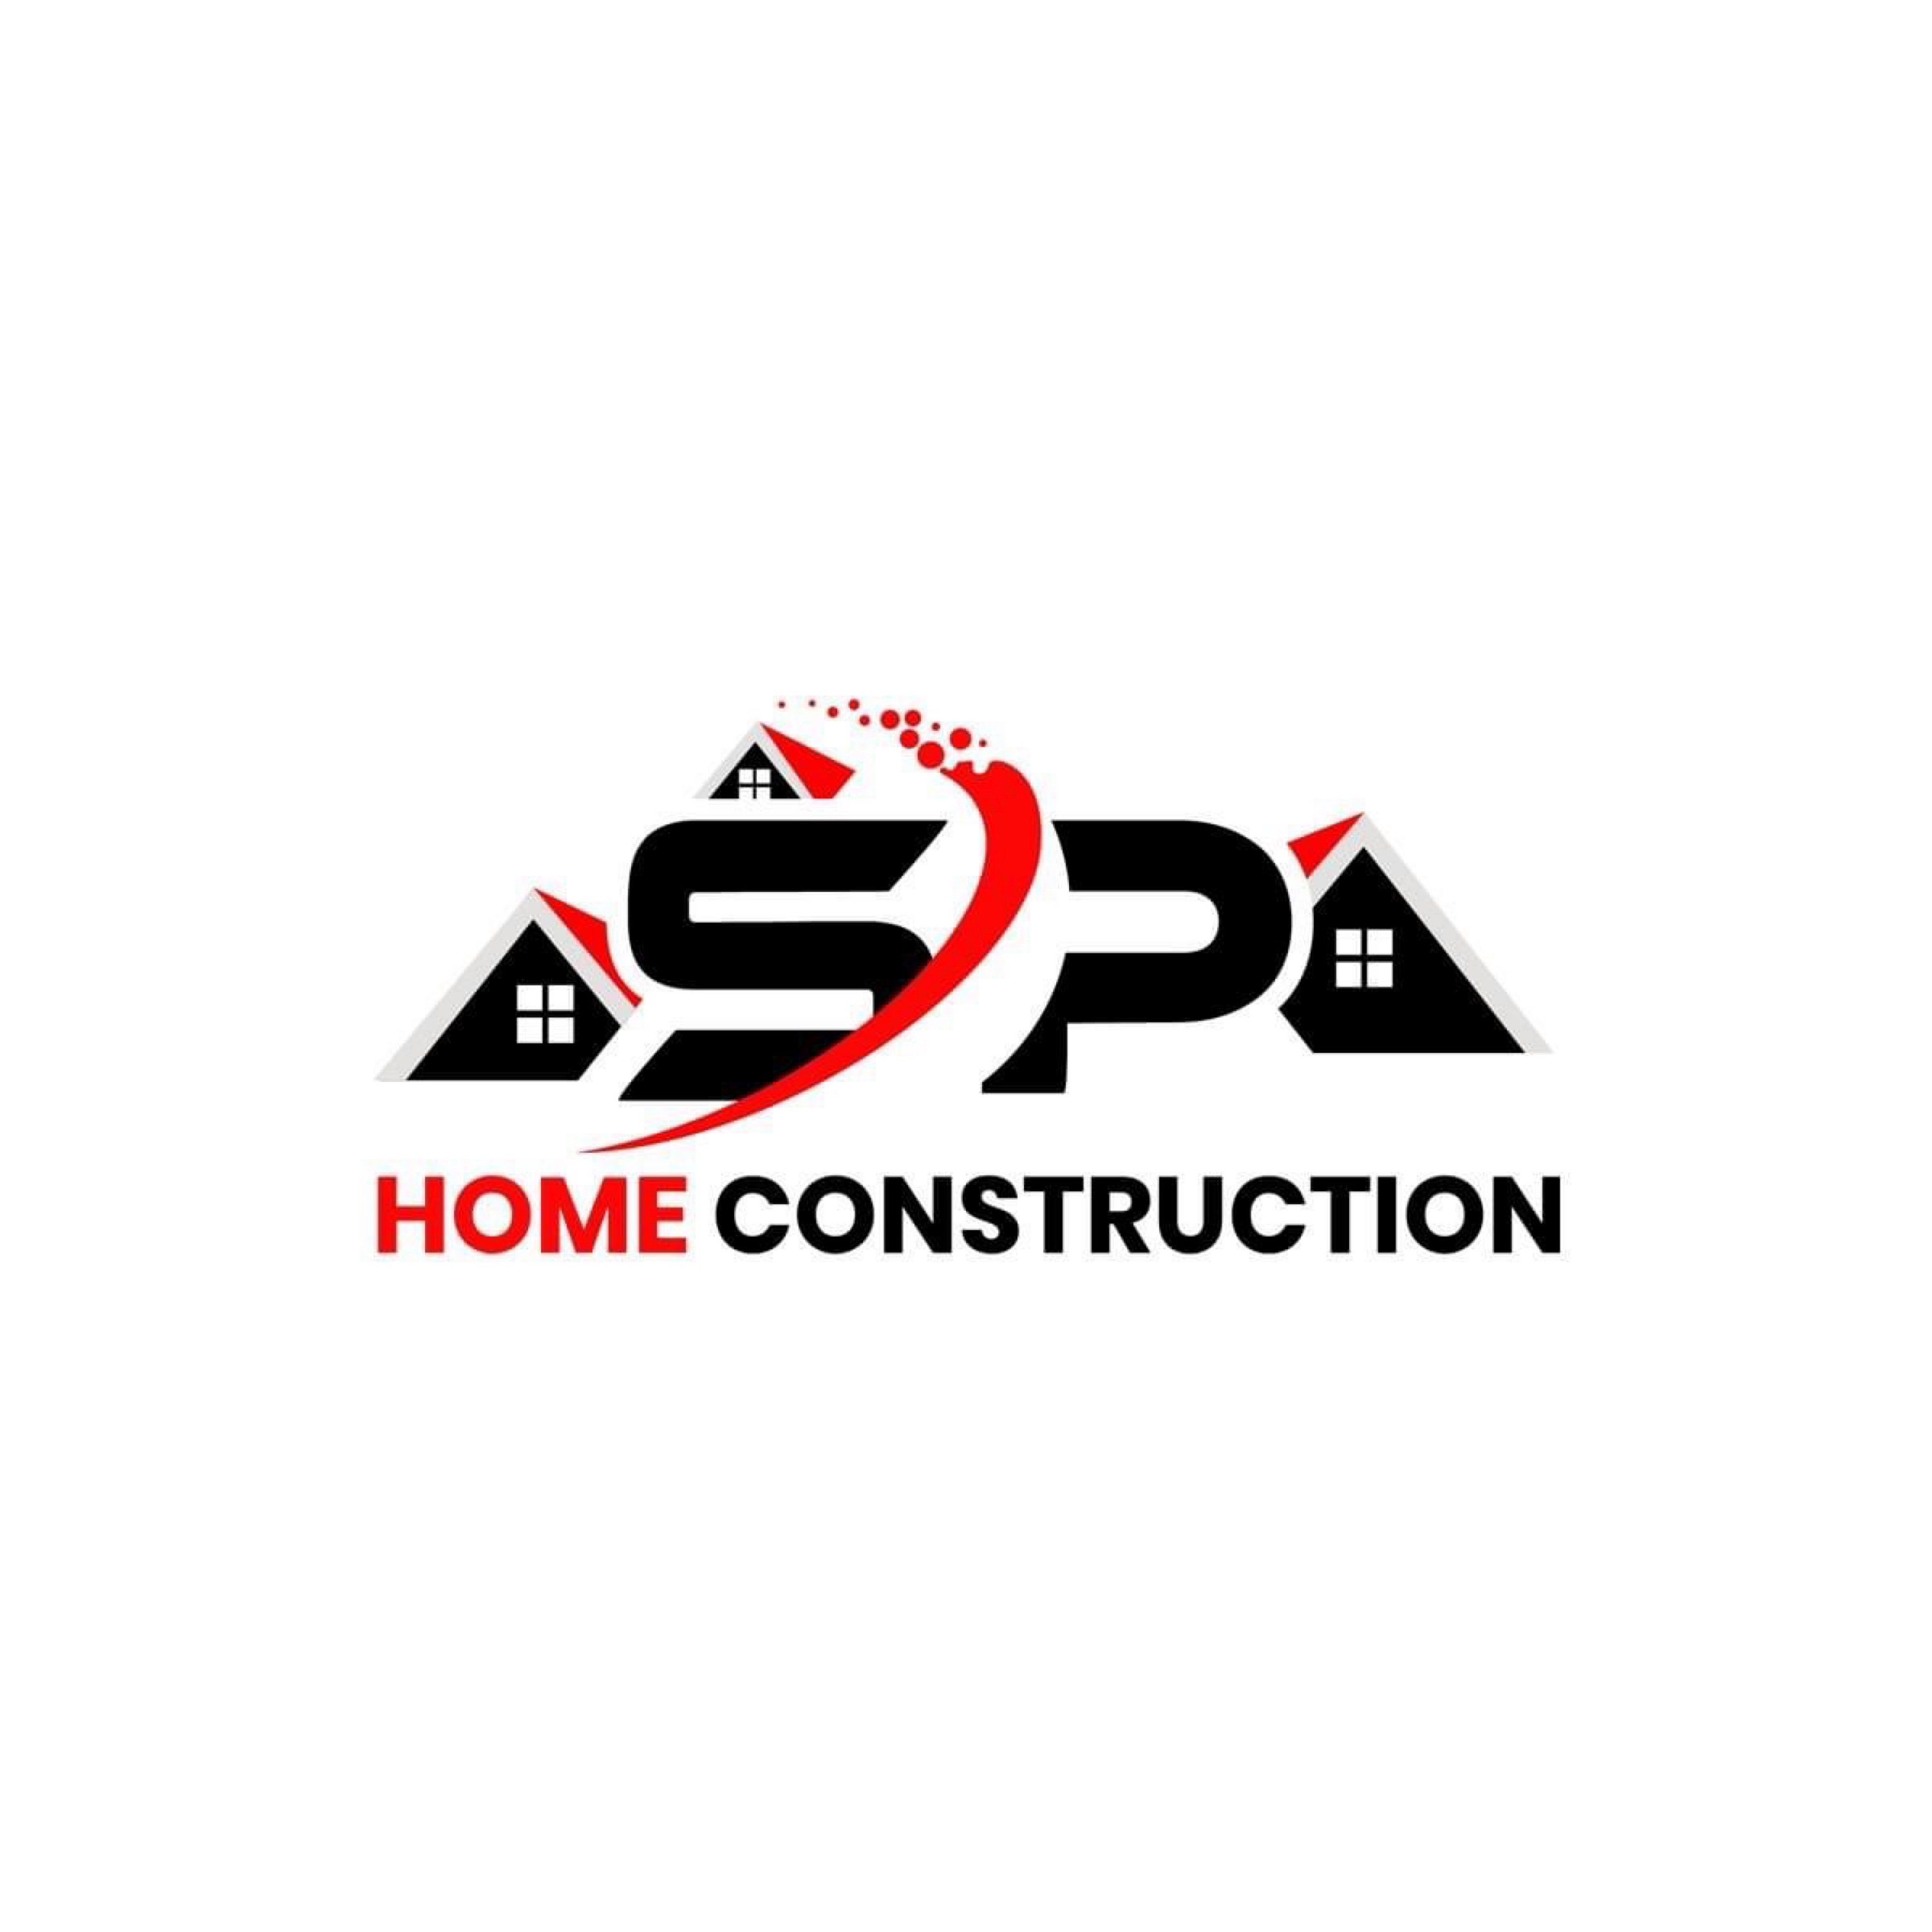 SP Home Construction - Unlicensed Contractor Logo